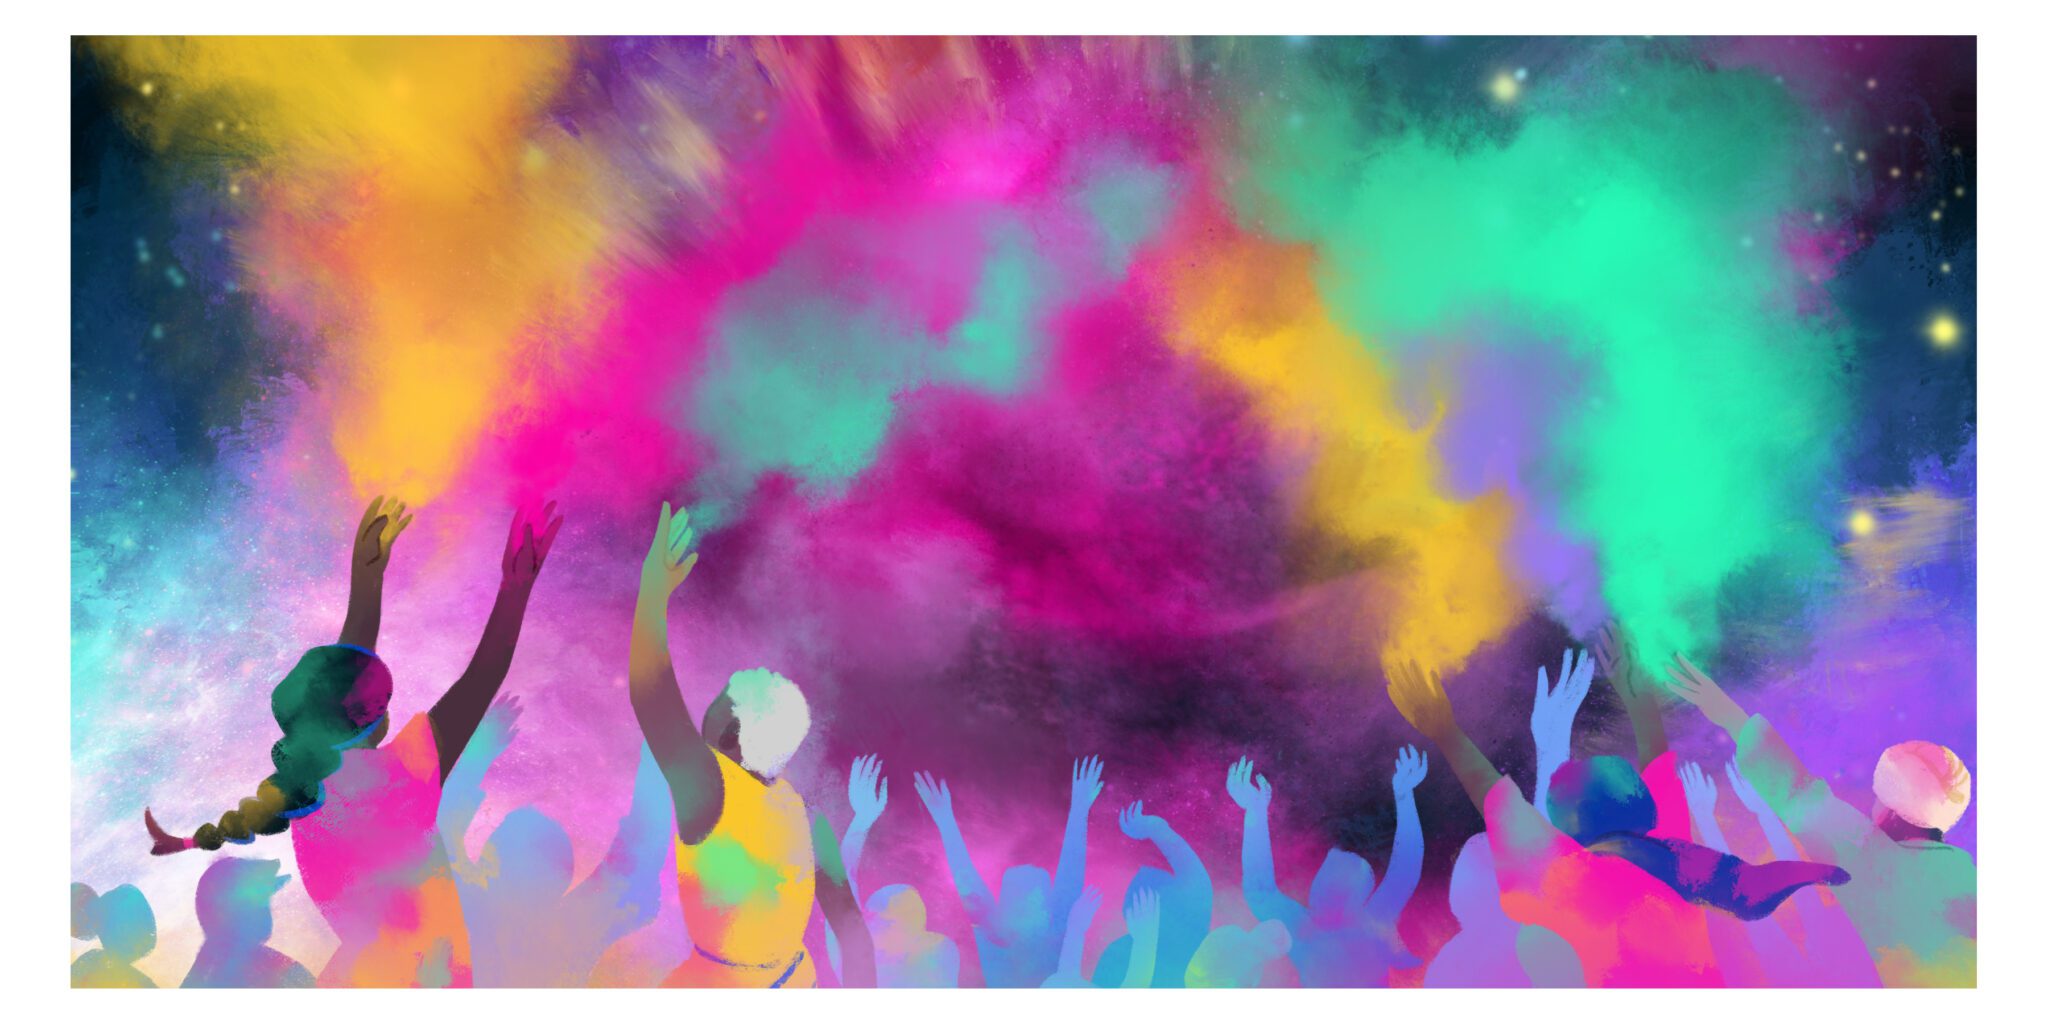 Love, Goodness, and Renewal | The Colorful Celebration of Holi